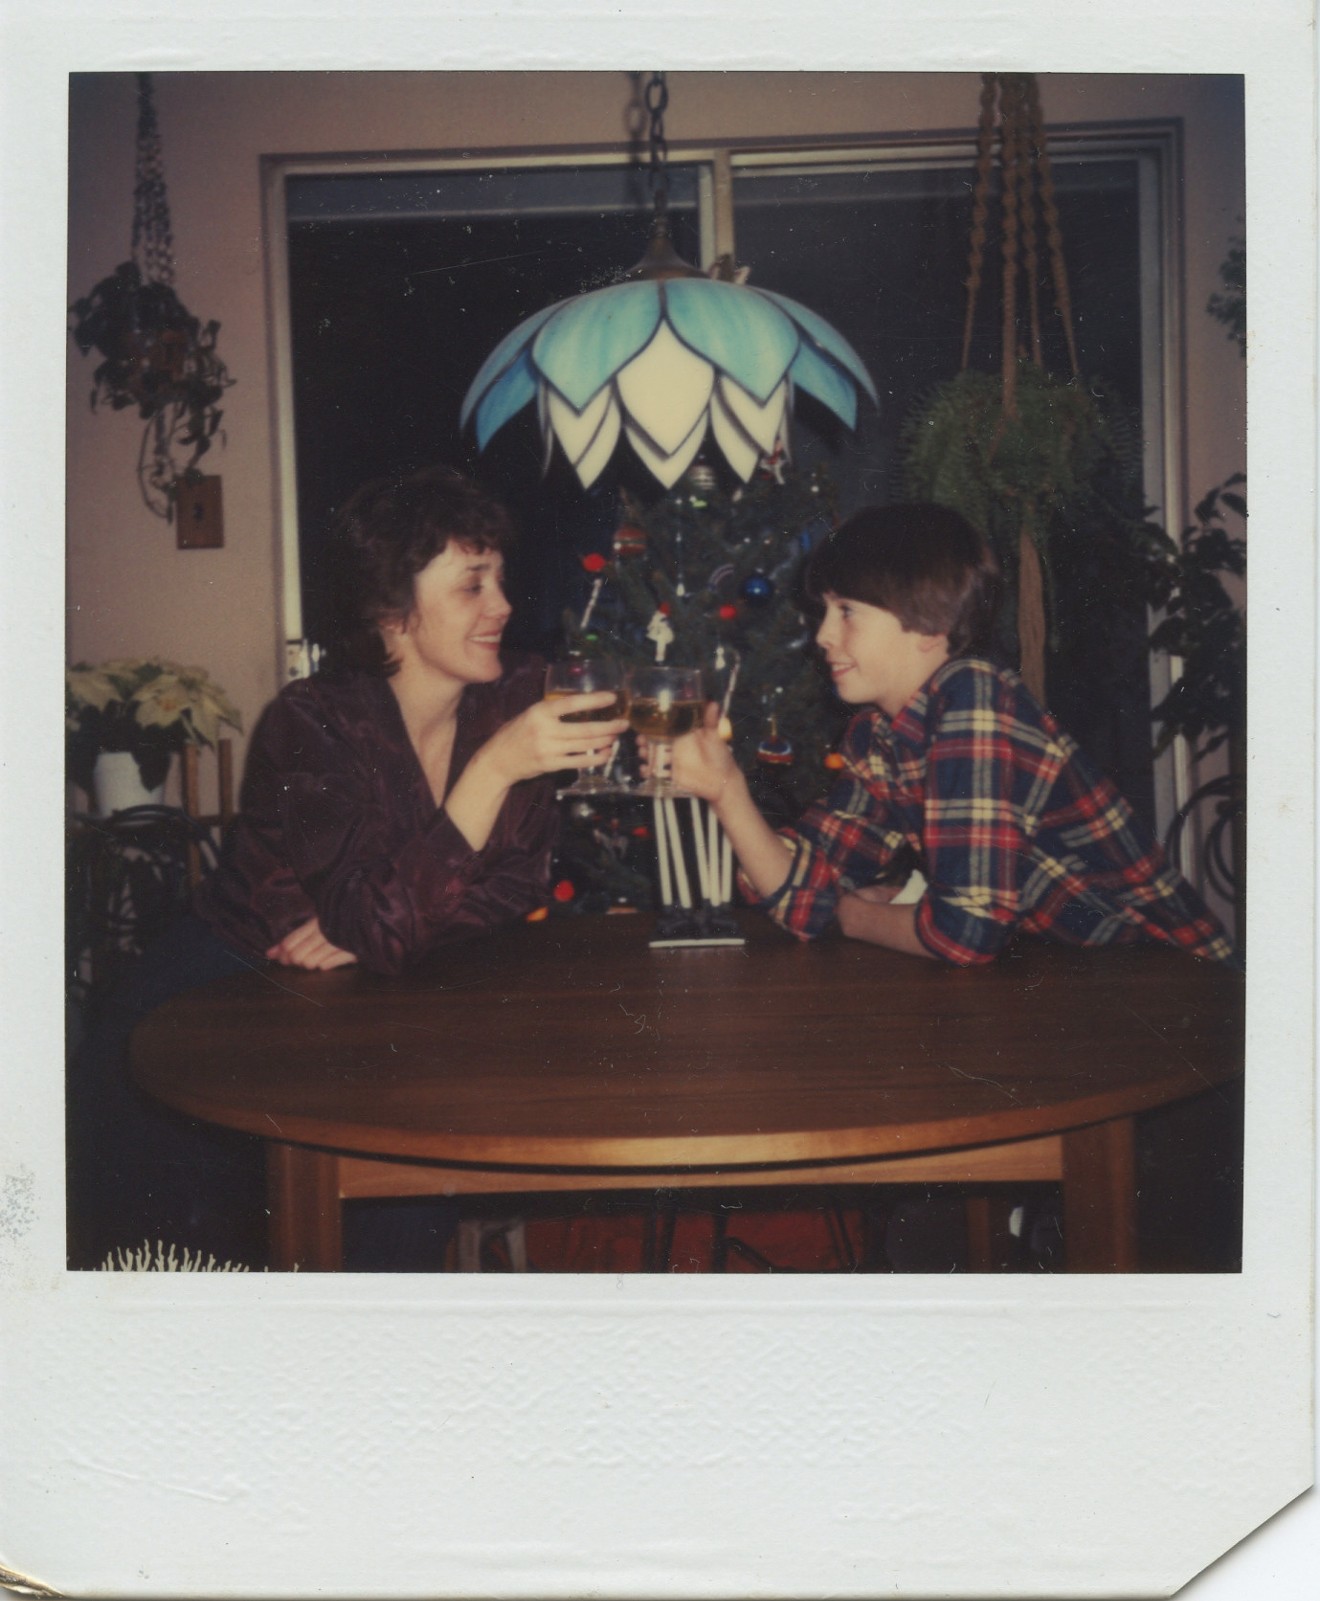 There goes his hero: Young Dave Grohl and his mom make a Christmas toast under a very '70s/'80s dining room lamp.